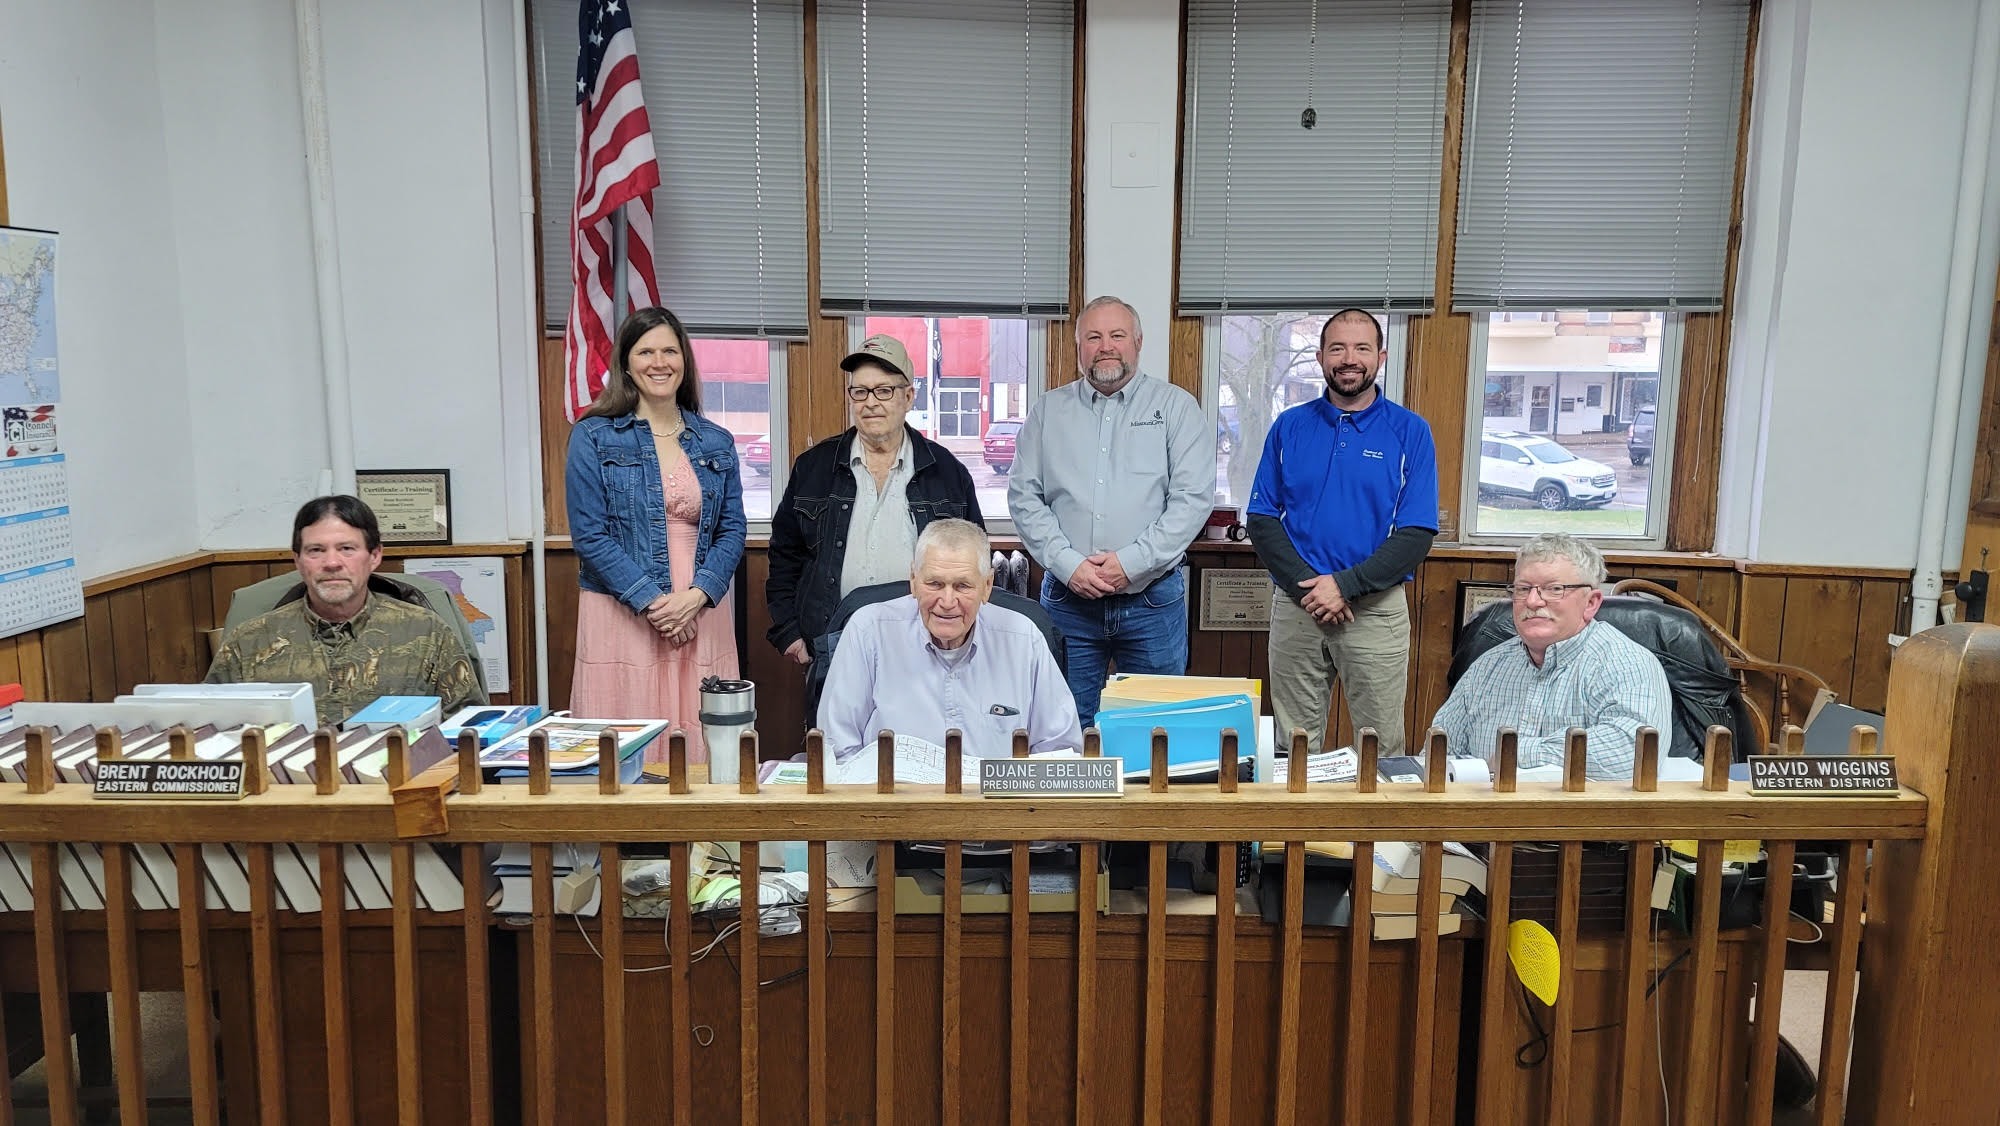 The Scotland County Commission applied for Agri-Ready County Designation on March 30, 2022. Attending the Commission session were Ashley McCarty, MFC Executive Director, Larry "Doc" Wiggins, Kevin Buckallew and Chris Mallett. Commissioners seated from left to right are Brent Rockhold, Eastern Commissioner, Duane Ebeling, Presiding Commissioner, and David Wiggins, Western District. Photo credit to Echo Menges with the NEMOnews Media Group.